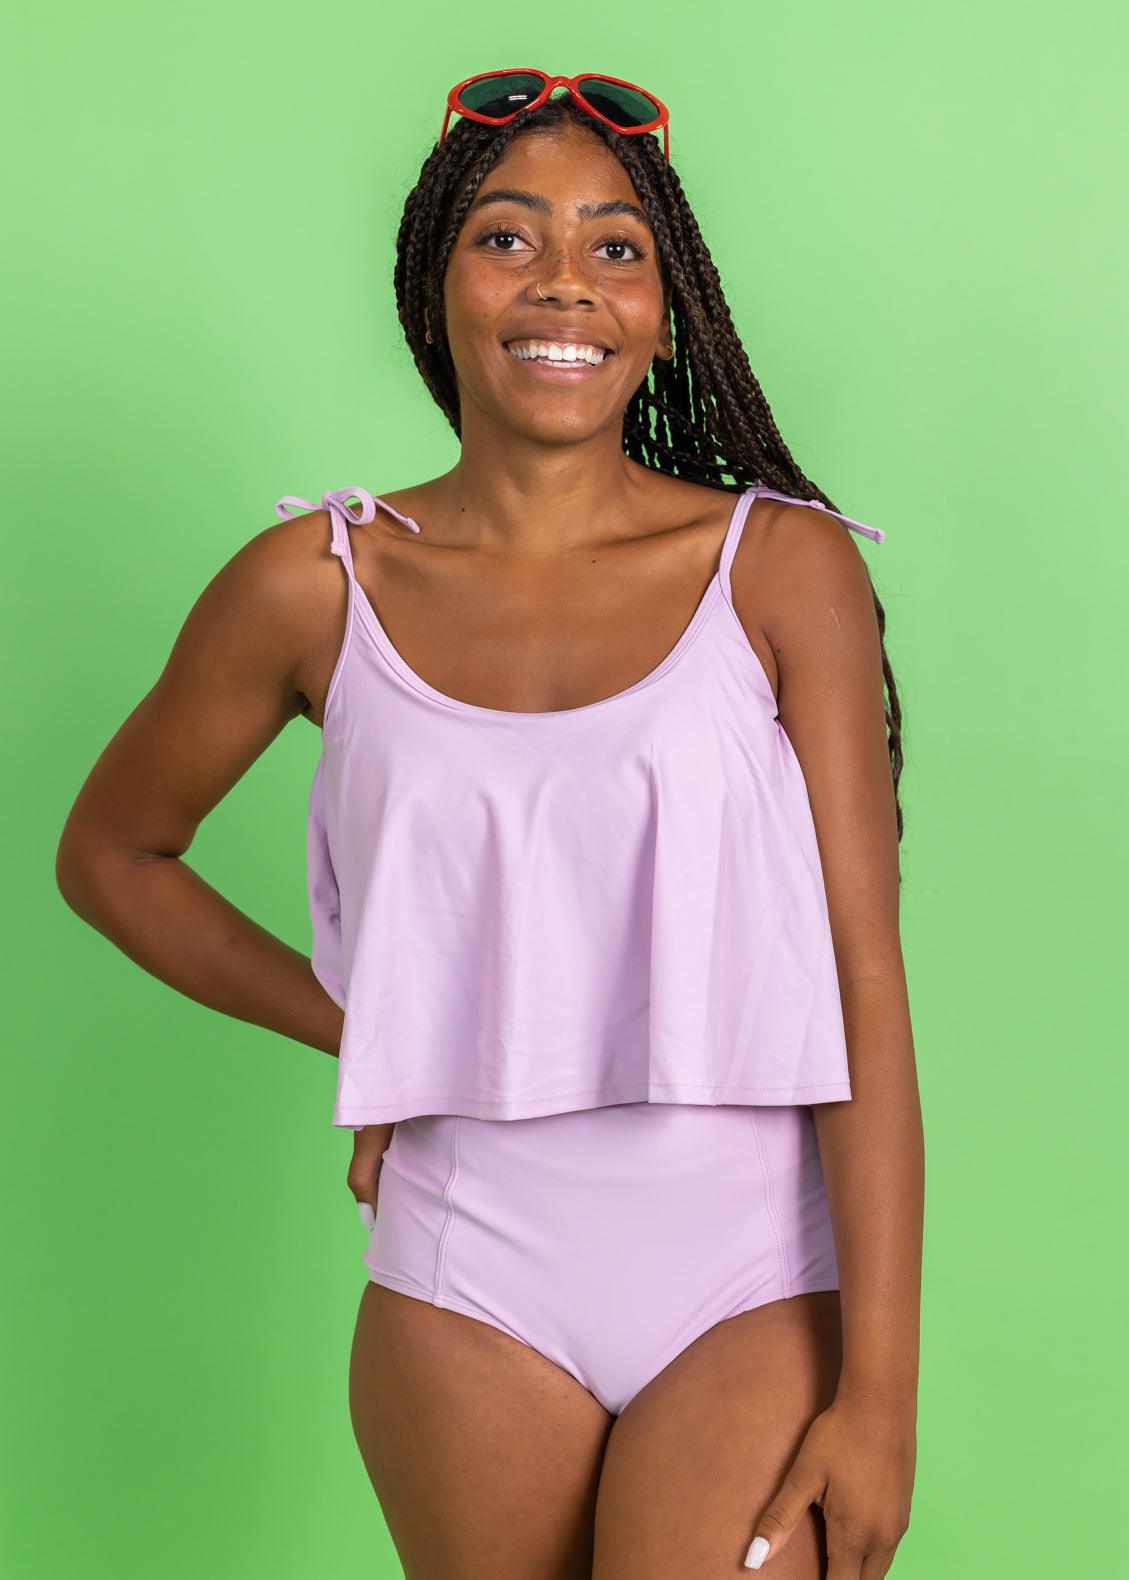 Crop Top Swimsuit - Just Lilac